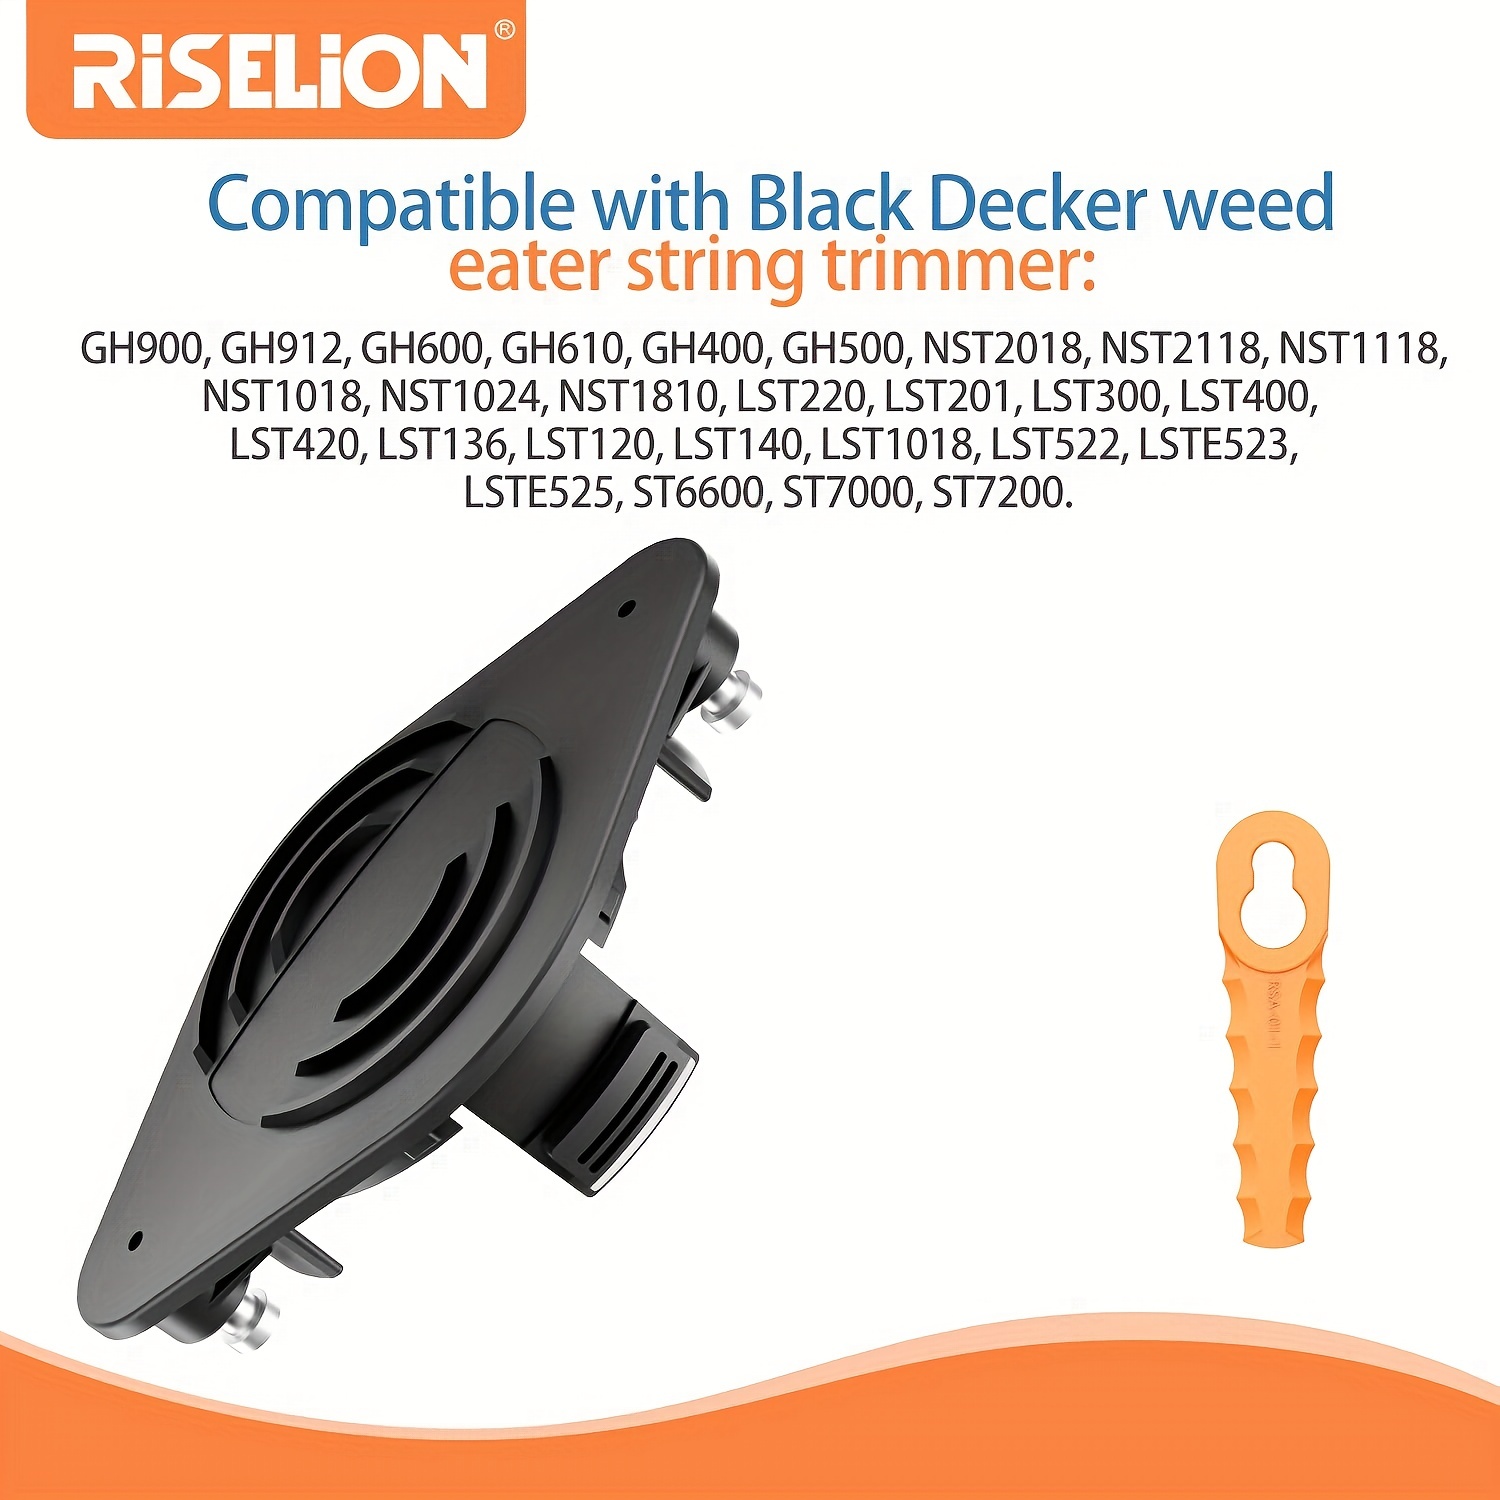 Eater Bladed Head Compatible With Black Decker Gh3000 Lst540